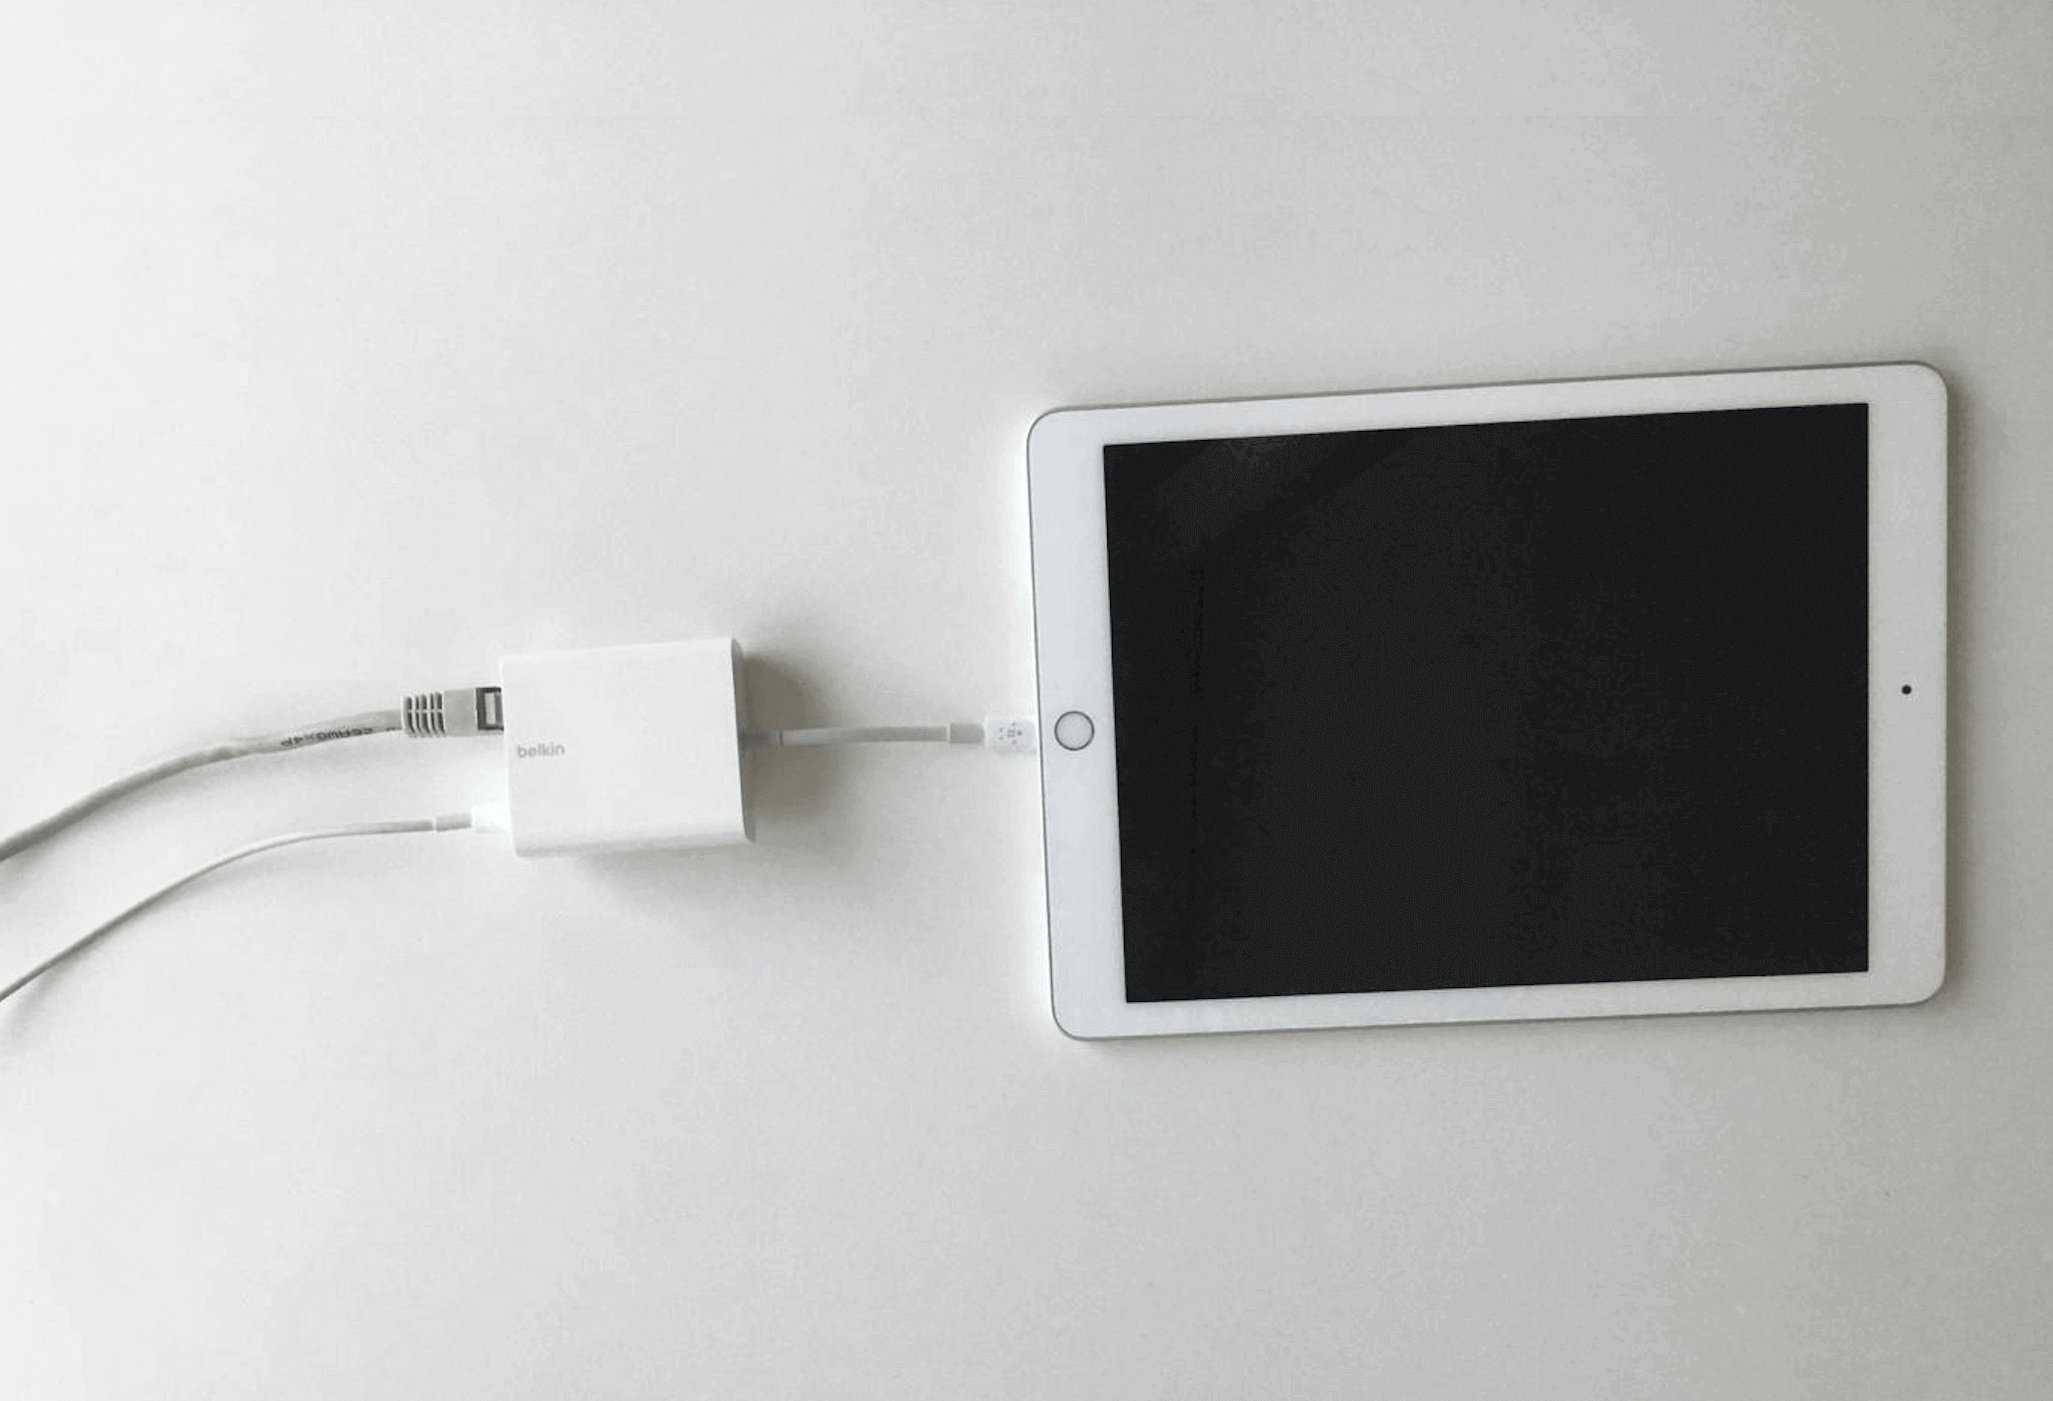 The Belkin adapter is plugged into the iPad.